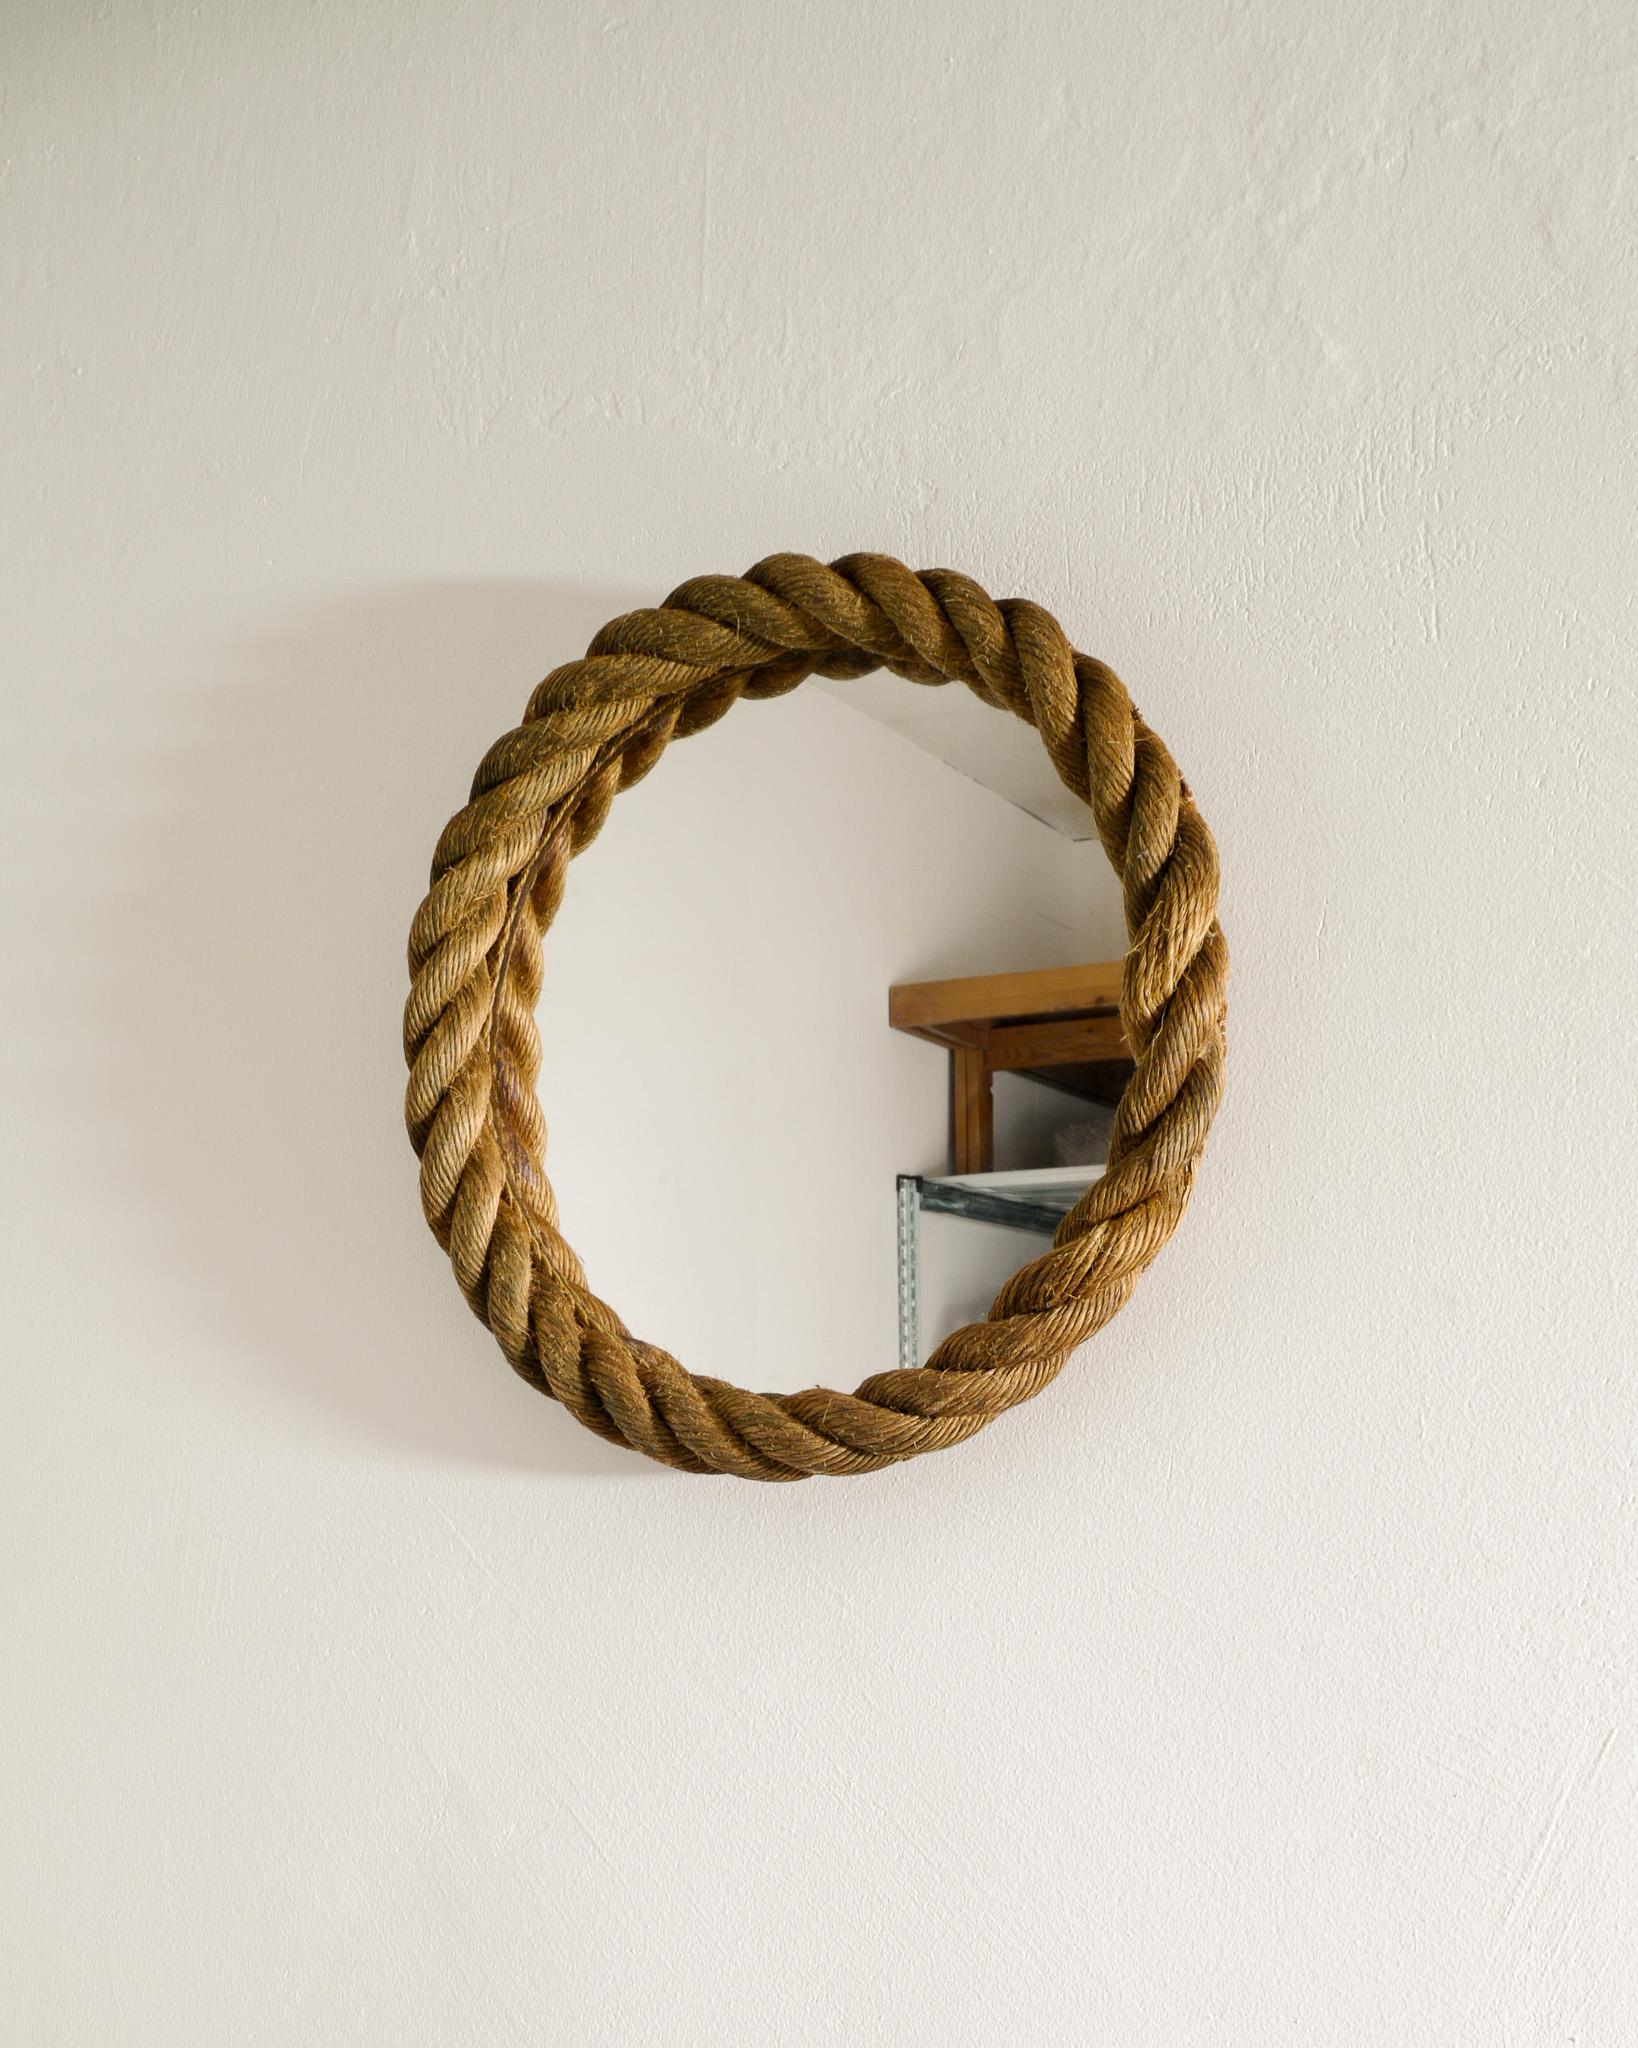 Rare and iconic round rope mirror by Adrien Audoux & Frida Minet produced in France 1960s. In good condition with nice patina from age and use. 

Dimensions: Diameter: 45 cm / 17.7